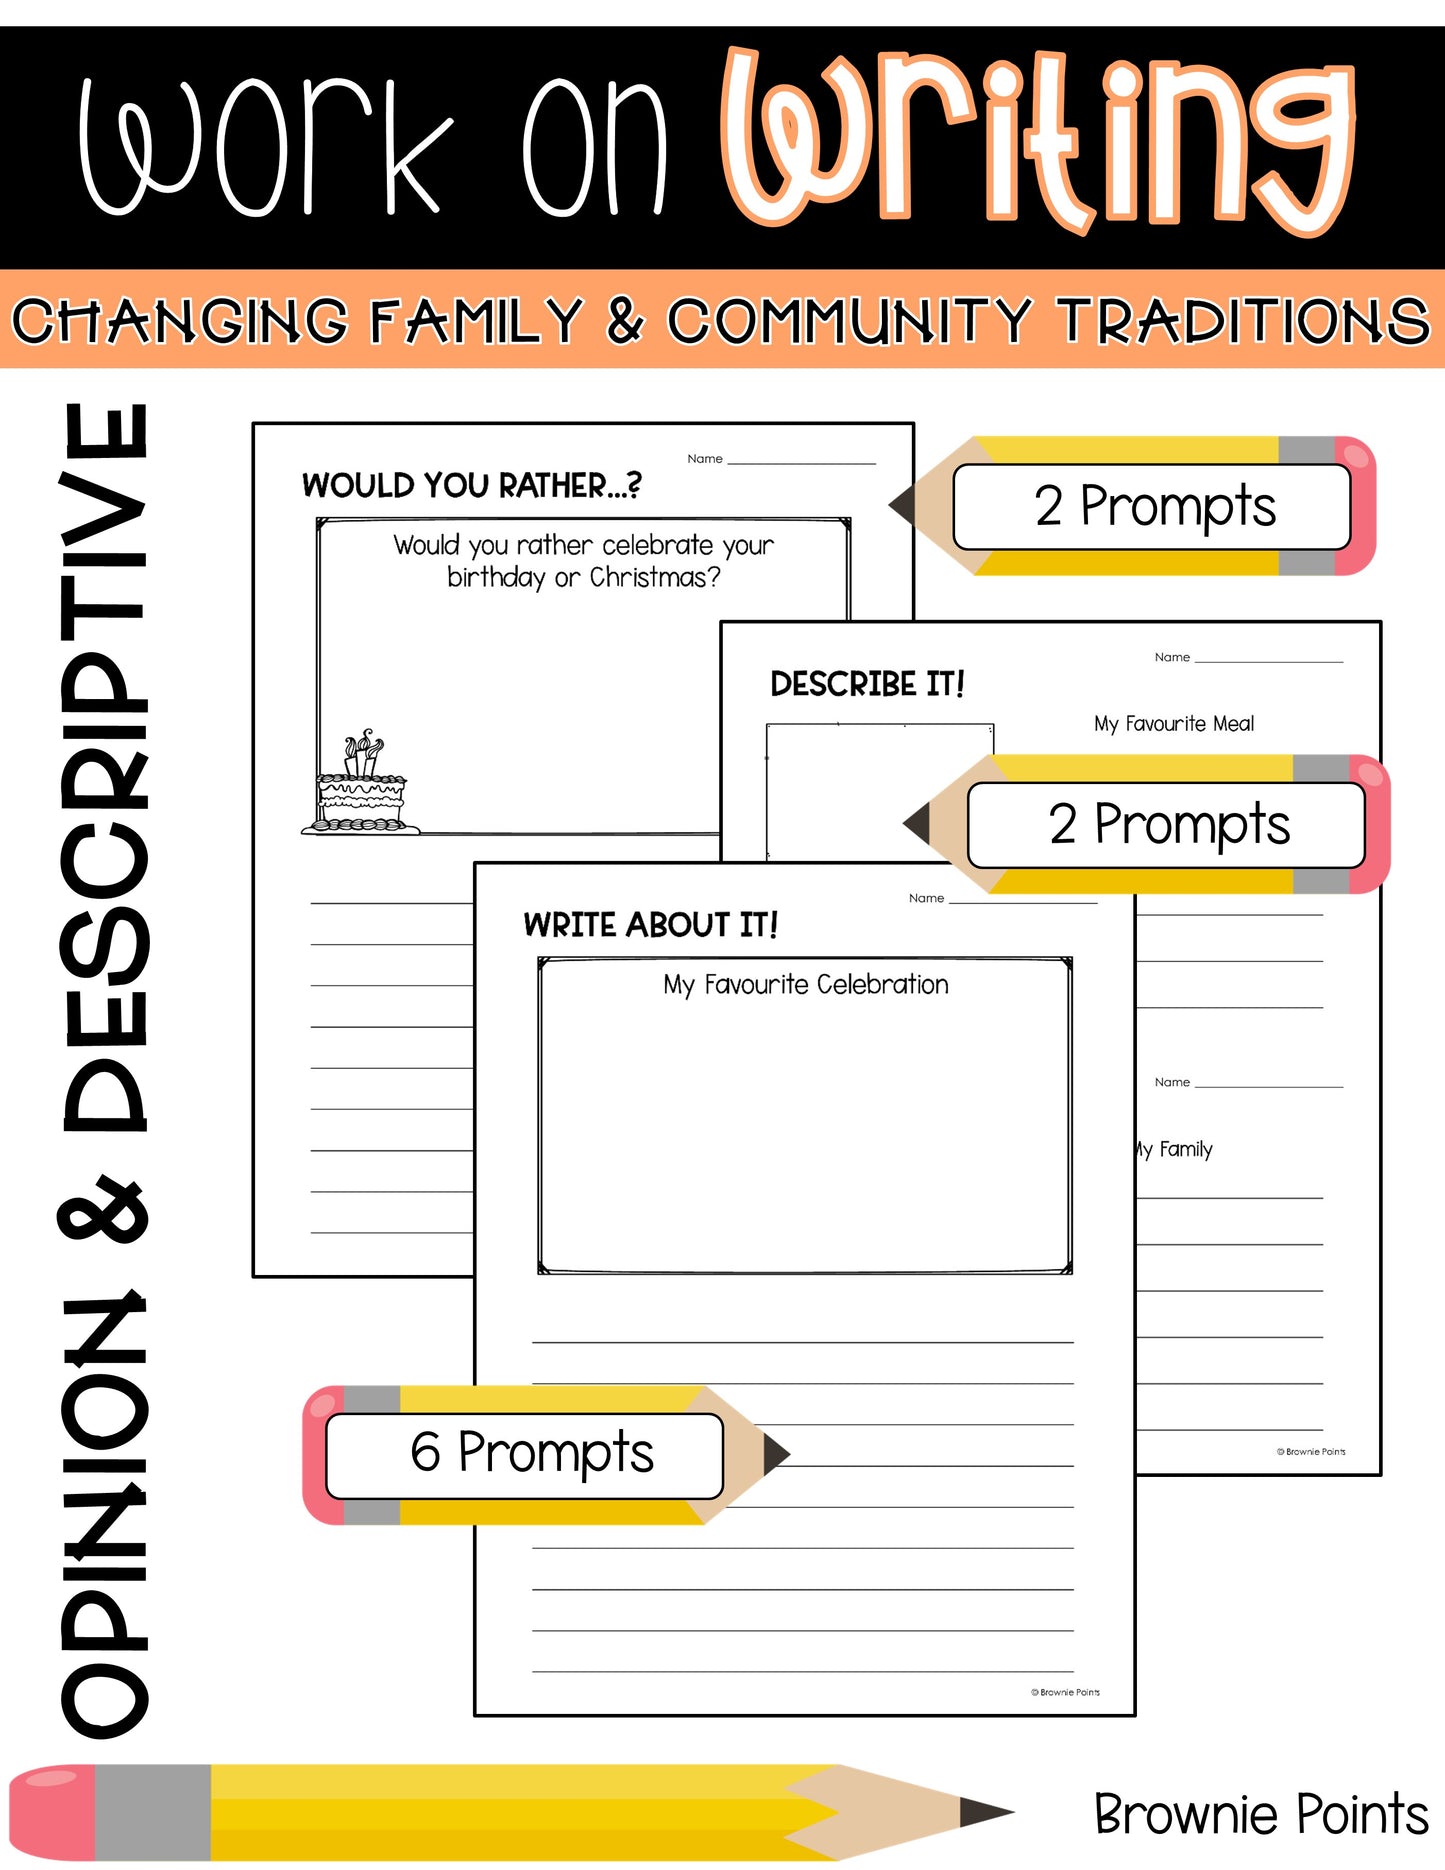 Work on Writing - Changing Family and Community Traditions